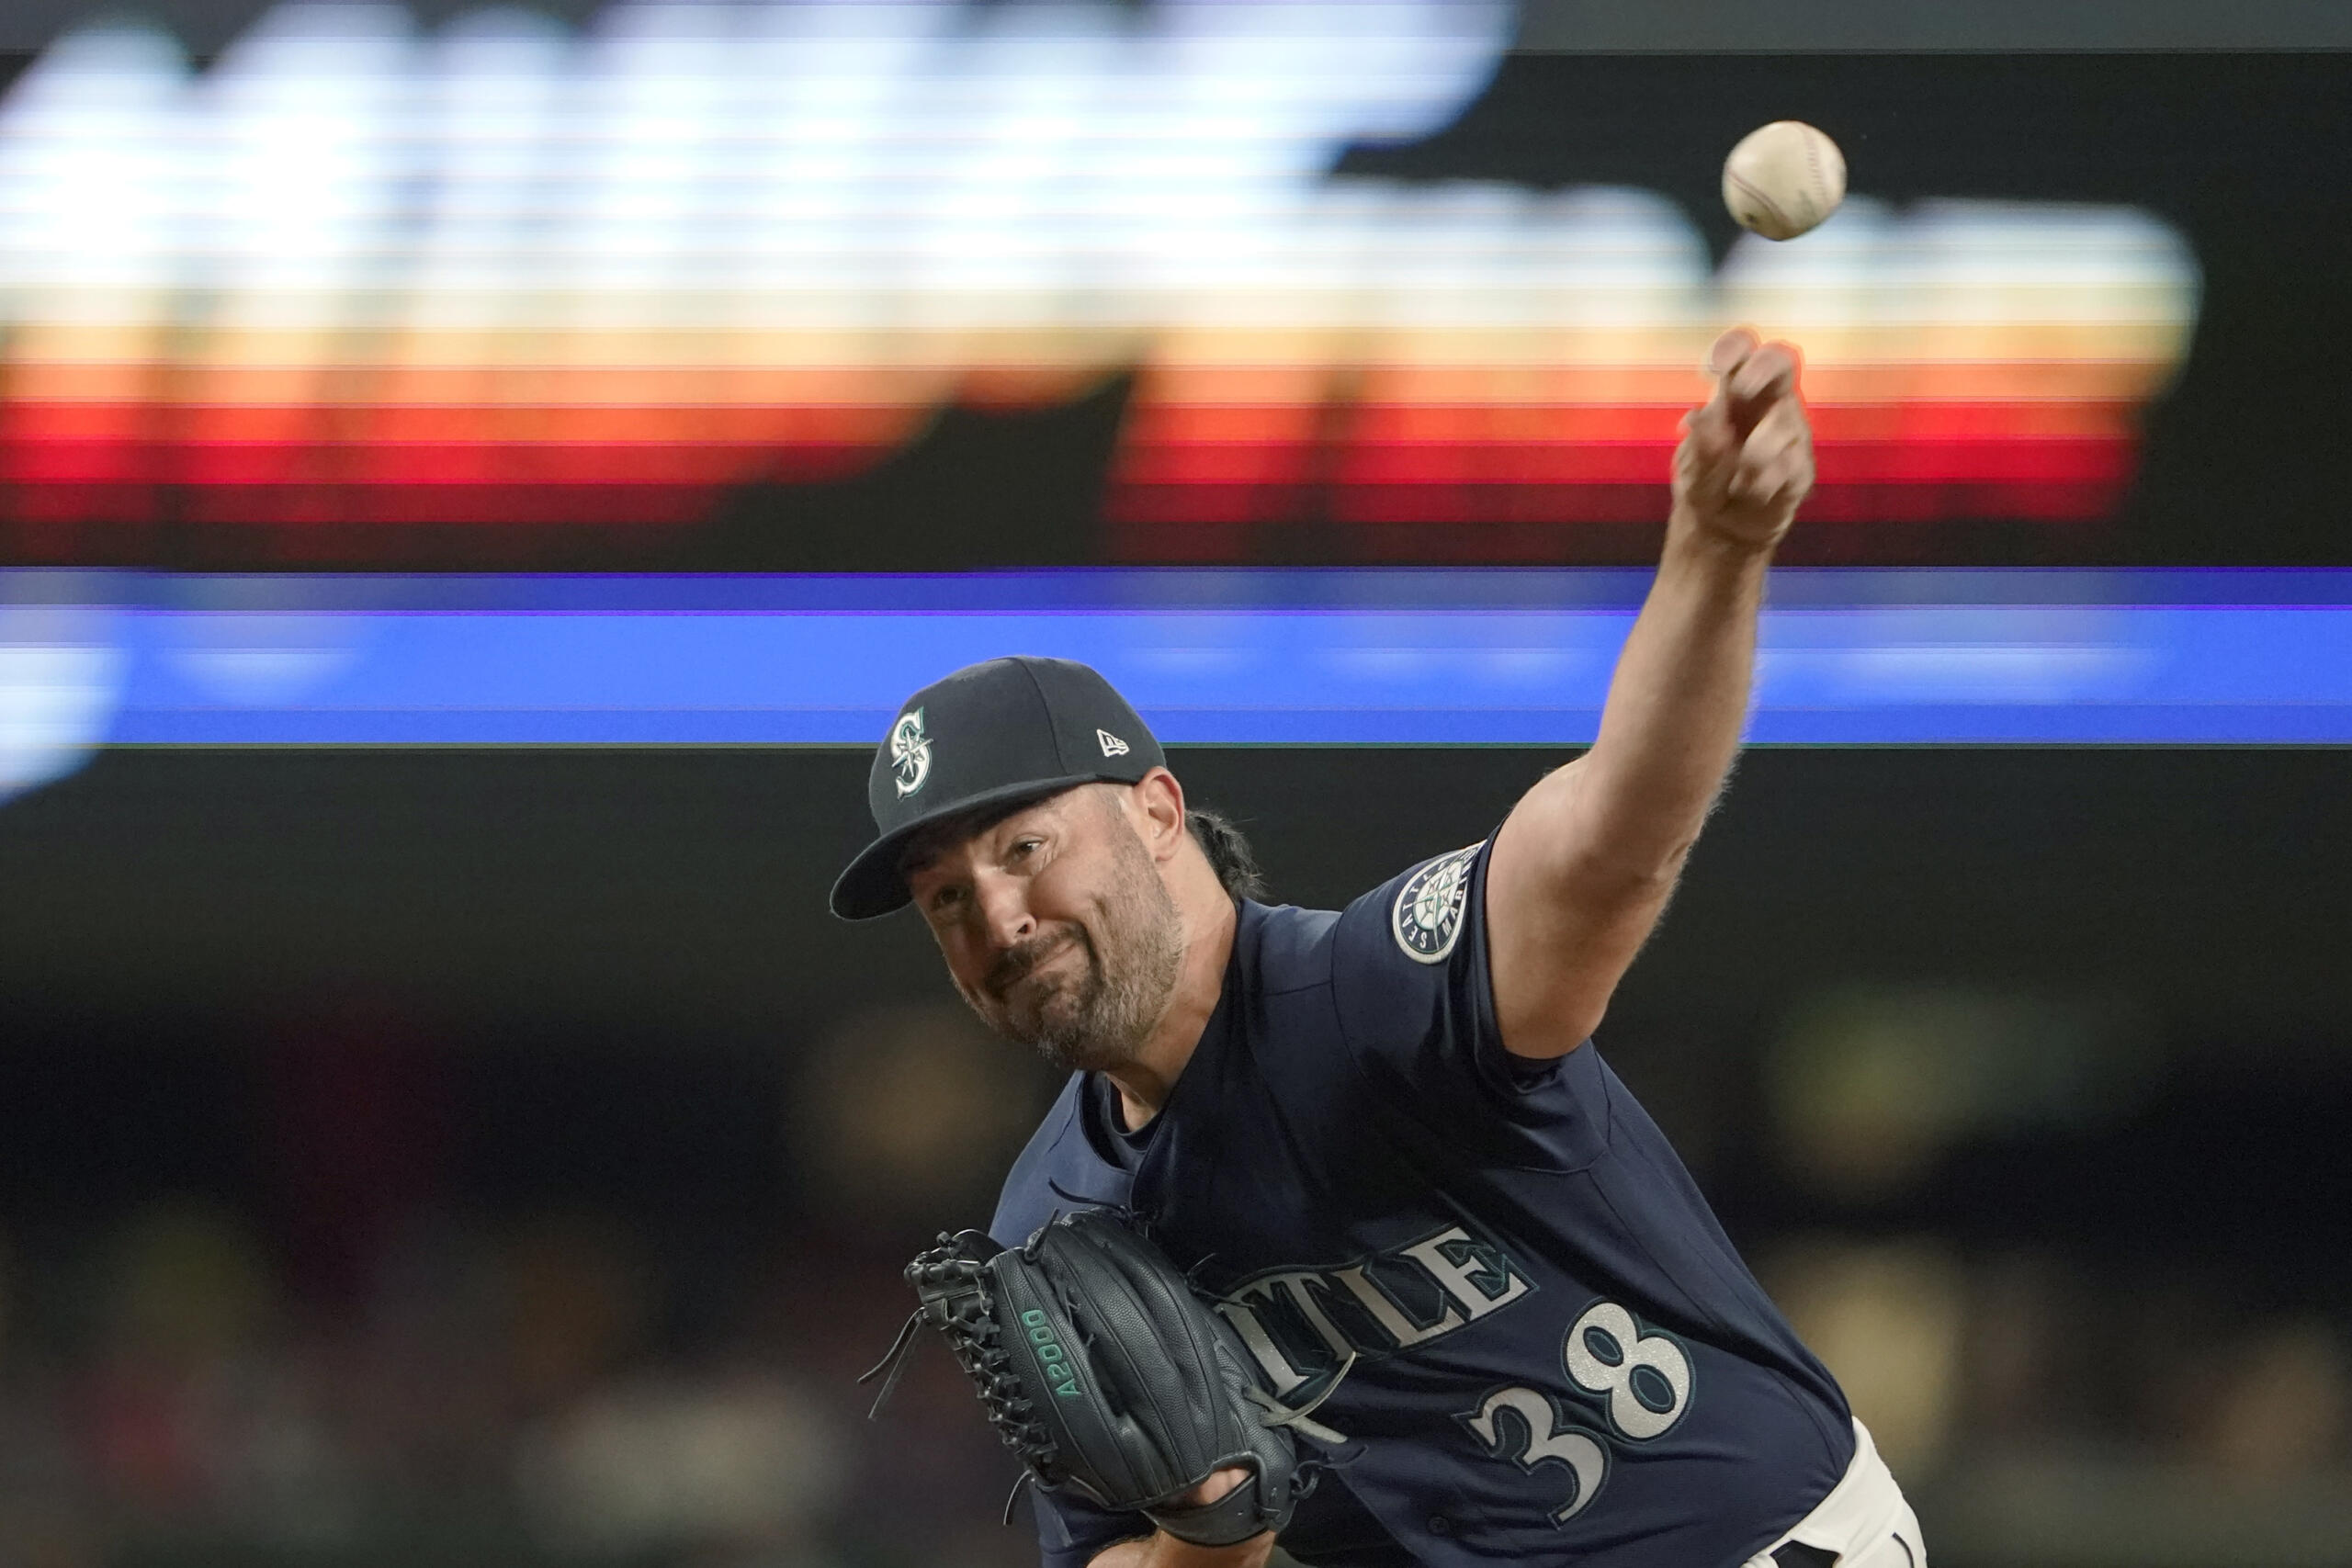 Seattle Mariners starting pitcher Robbie Ray throws against the Washington Nationals during the sixth inning of a baseball game, Tuesday, Aug. 23, 2022 in Seattle. (AP Photo/Ted S.